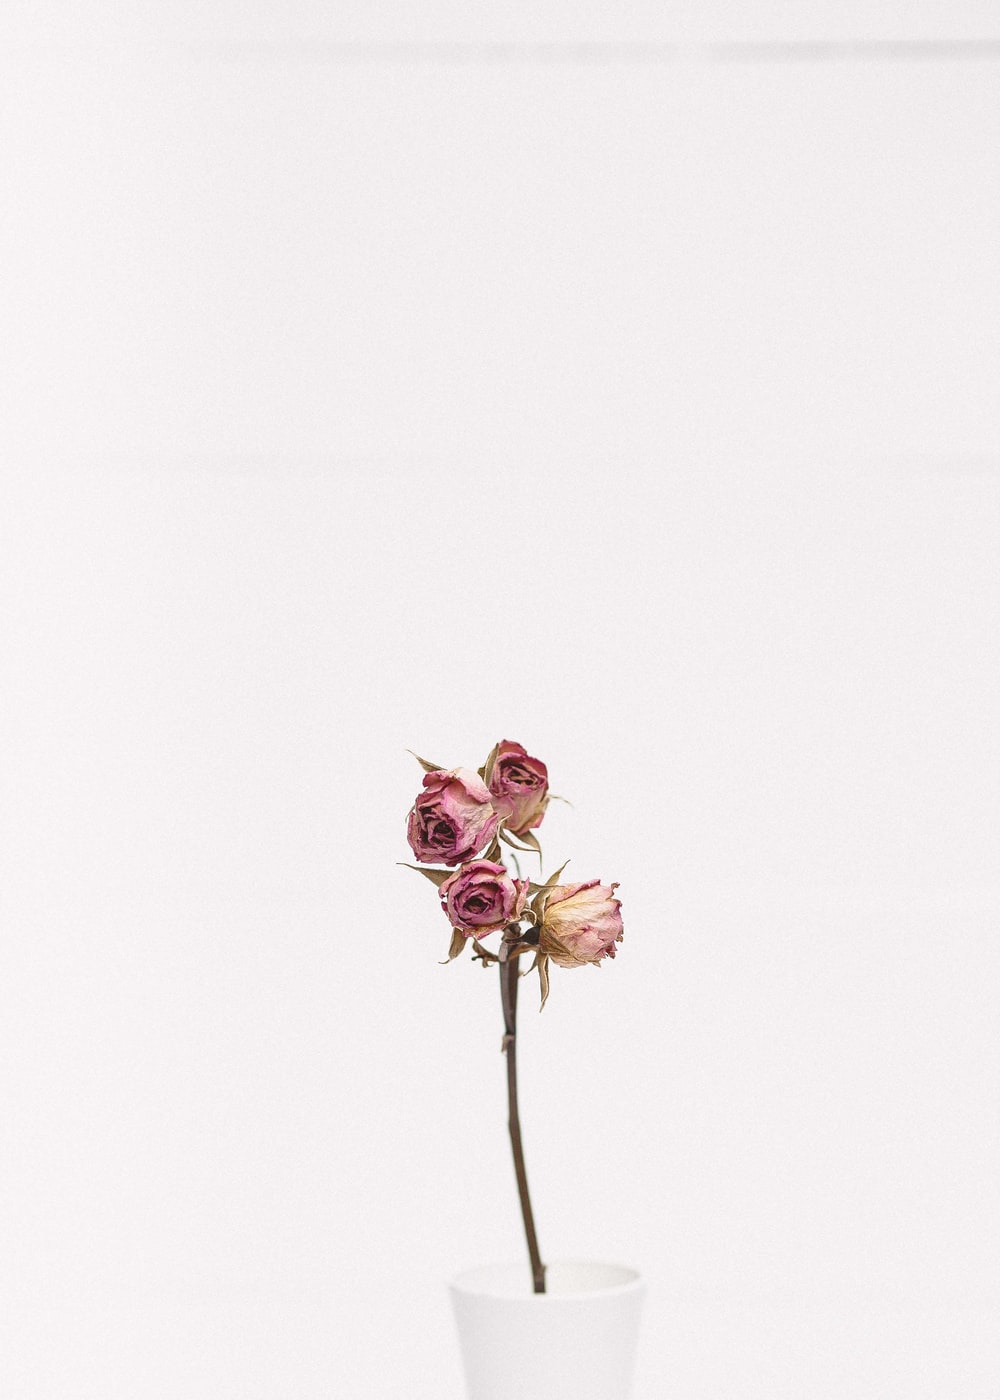 Minimalist Flower Picture. Download Free Image